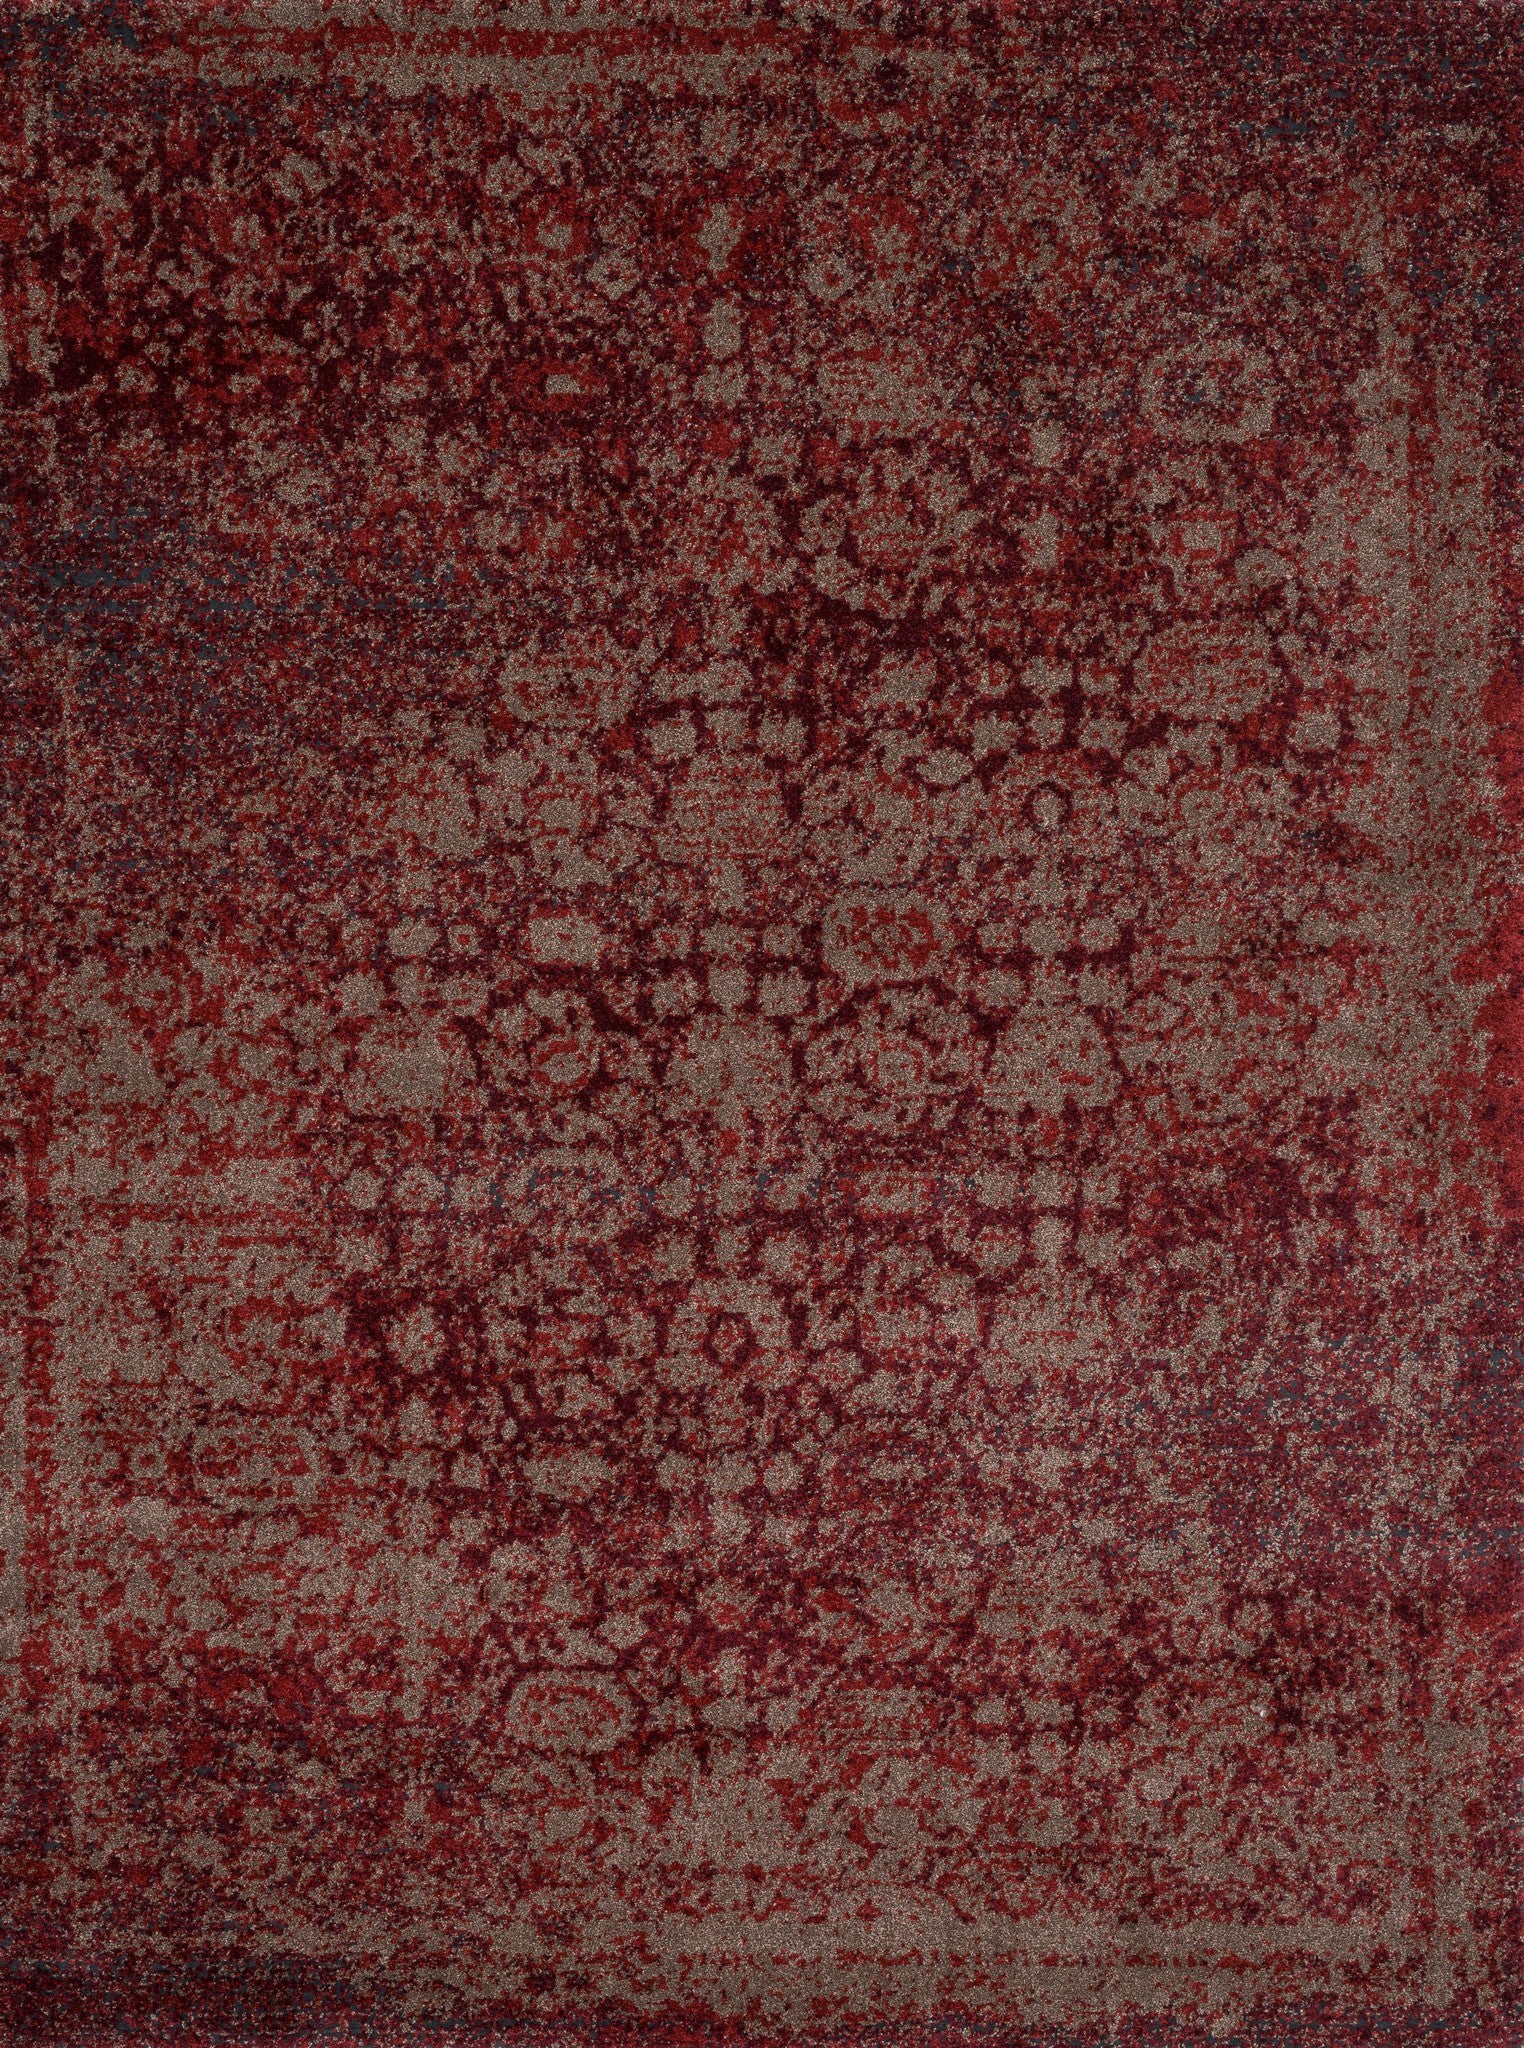 Loloi Viera VR-05 Red / Taupe Area Rug main image